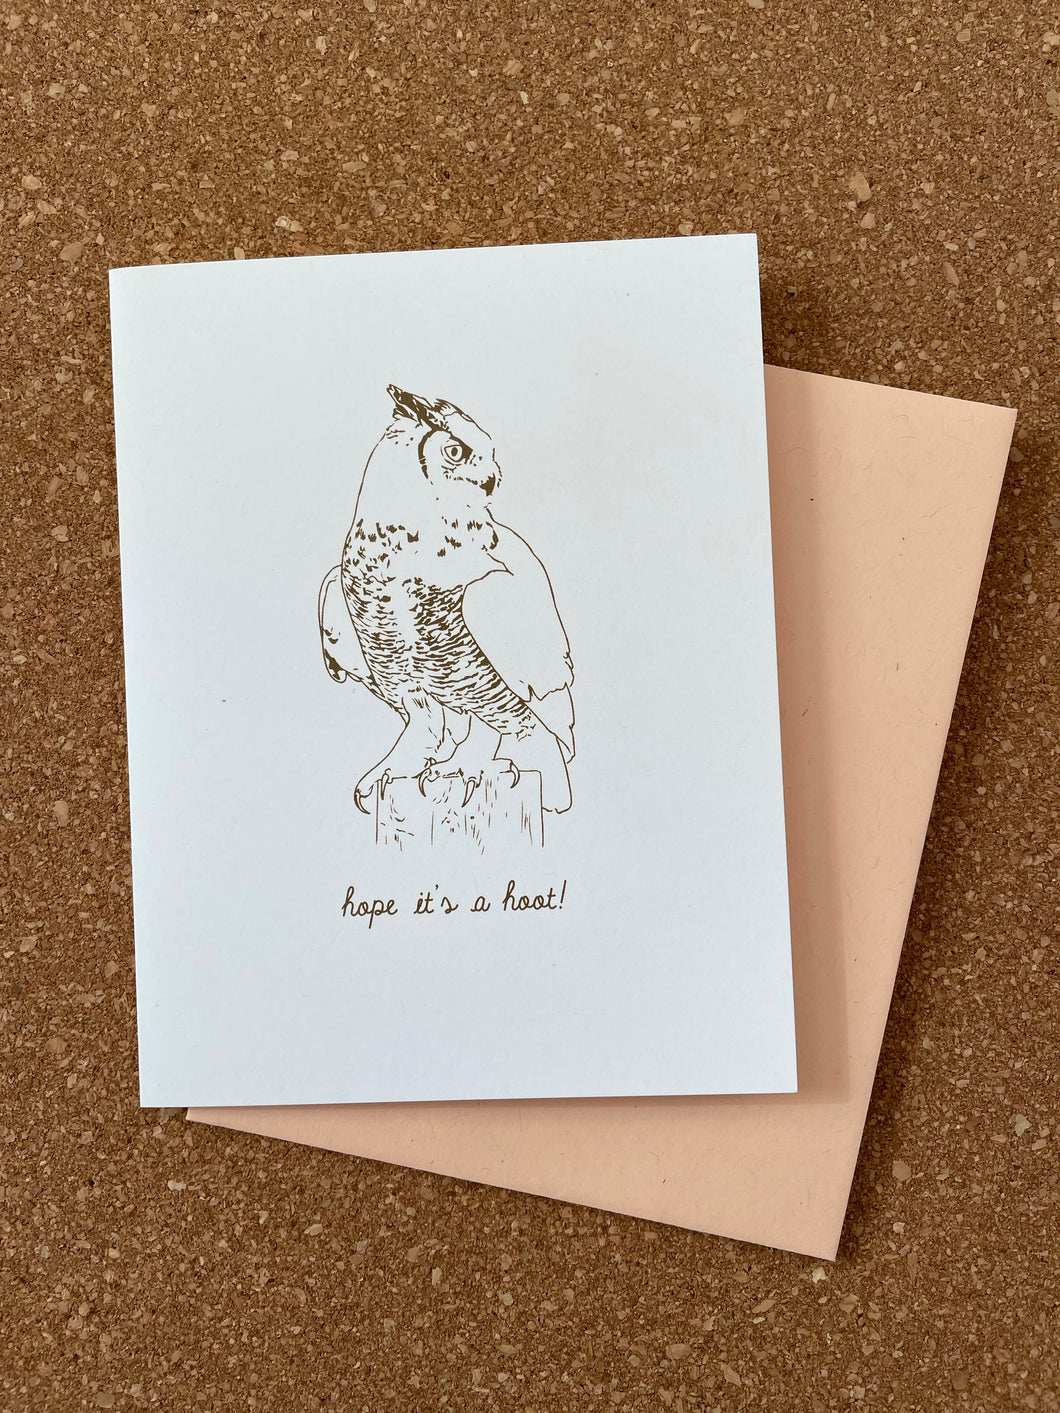 Great Horned Owl Greeting Card - hope it's a hoot!